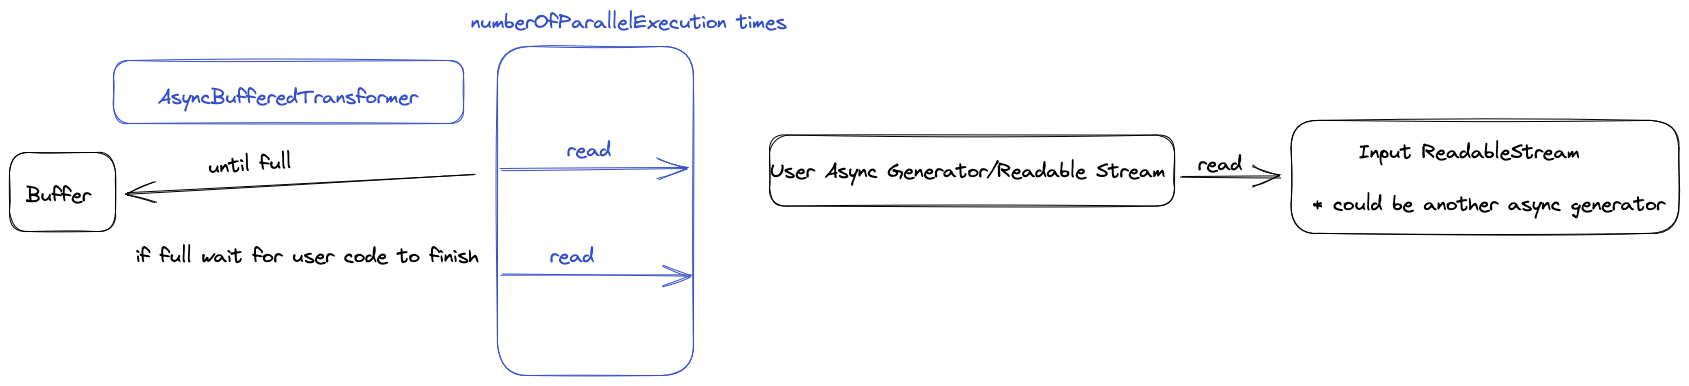 Overview of async transformer functionality